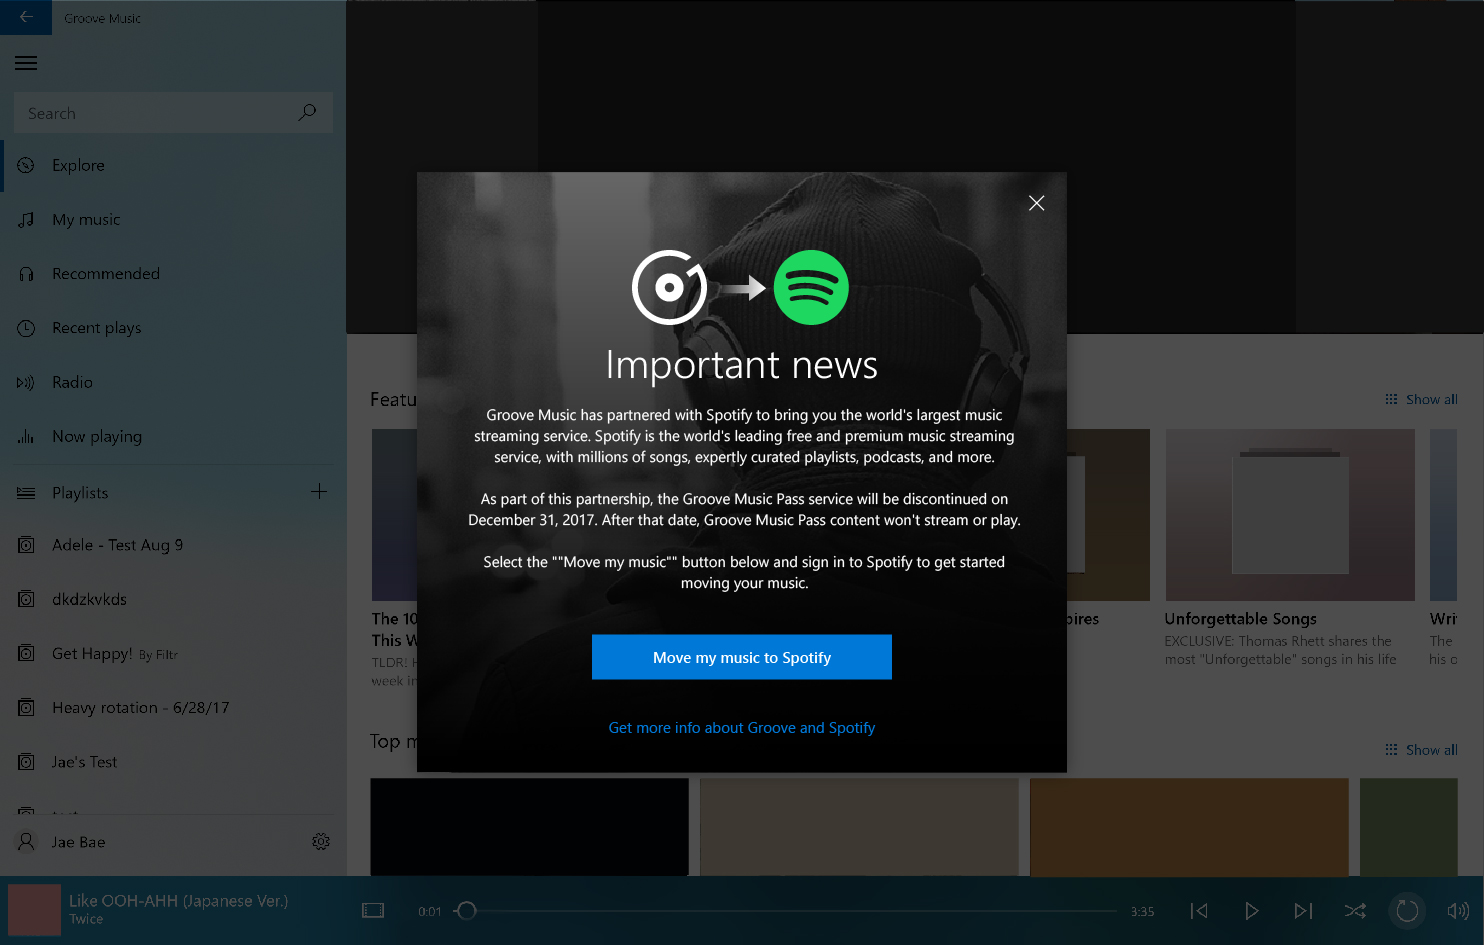 Groove notification prompting users to transition their music to Spotify